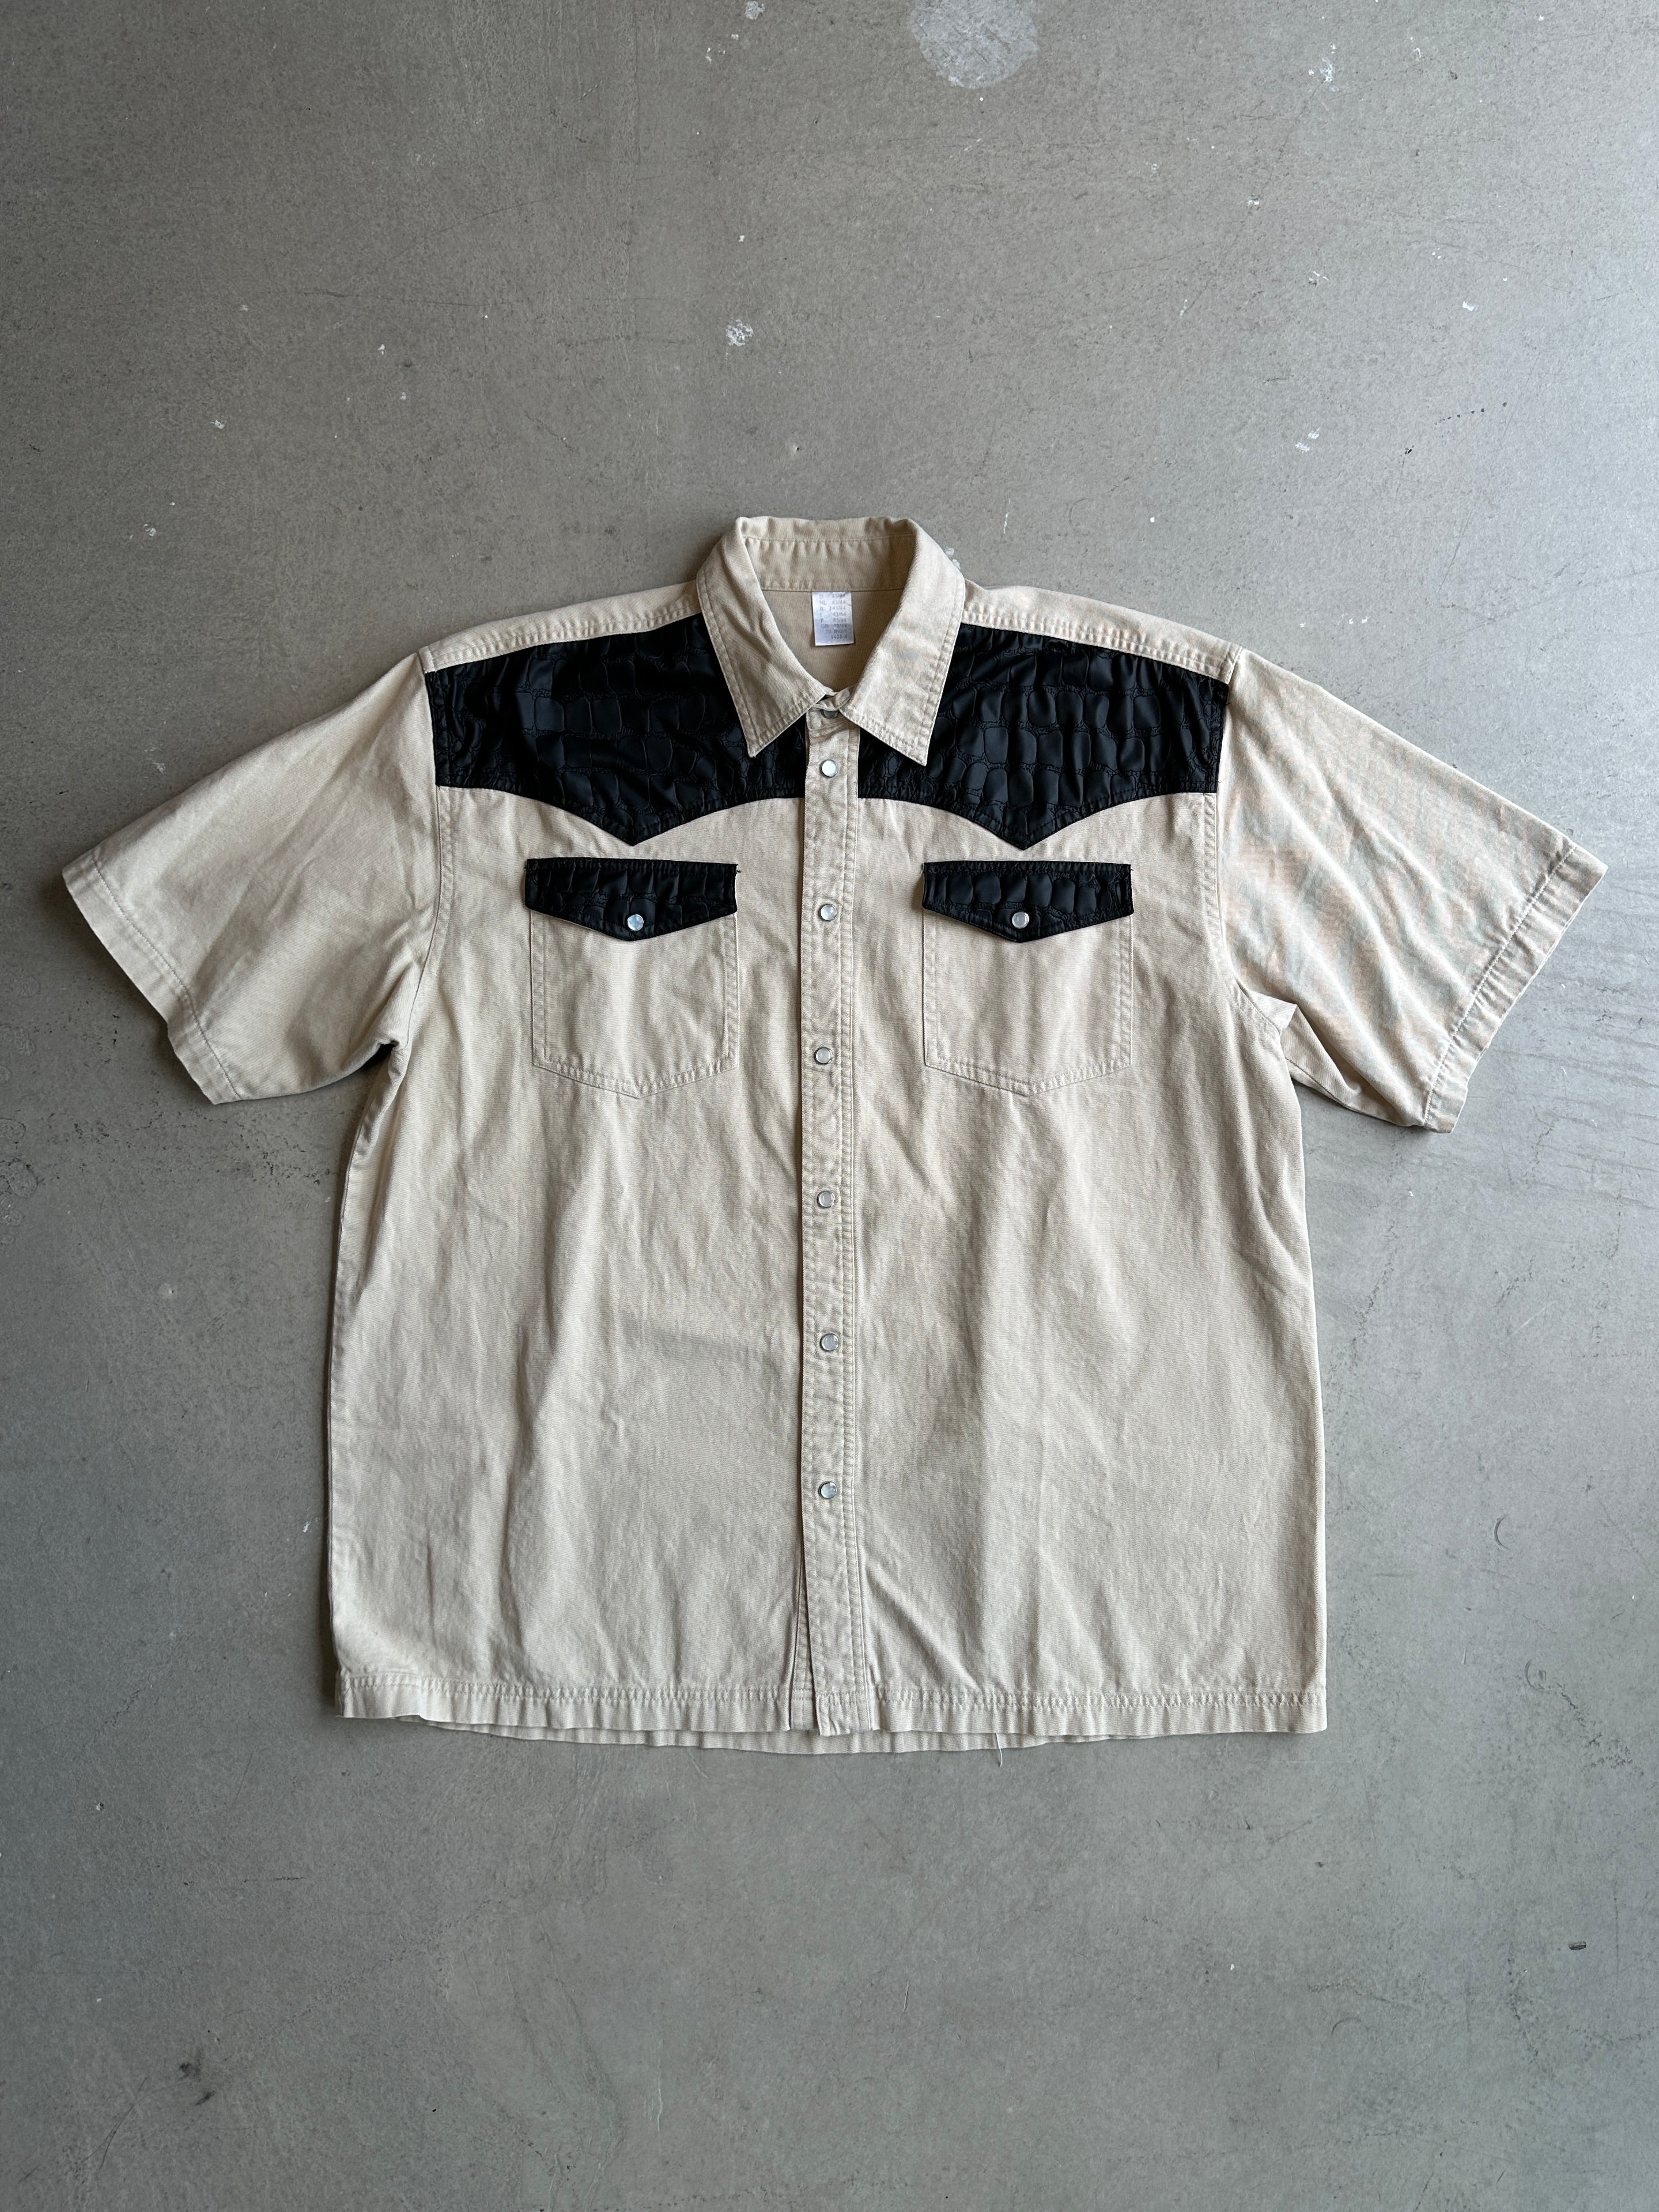 1990s HALF SLEEVE SHIRT WITH FAUX LEATHER DETAILS AT CHEST AND POCKETS